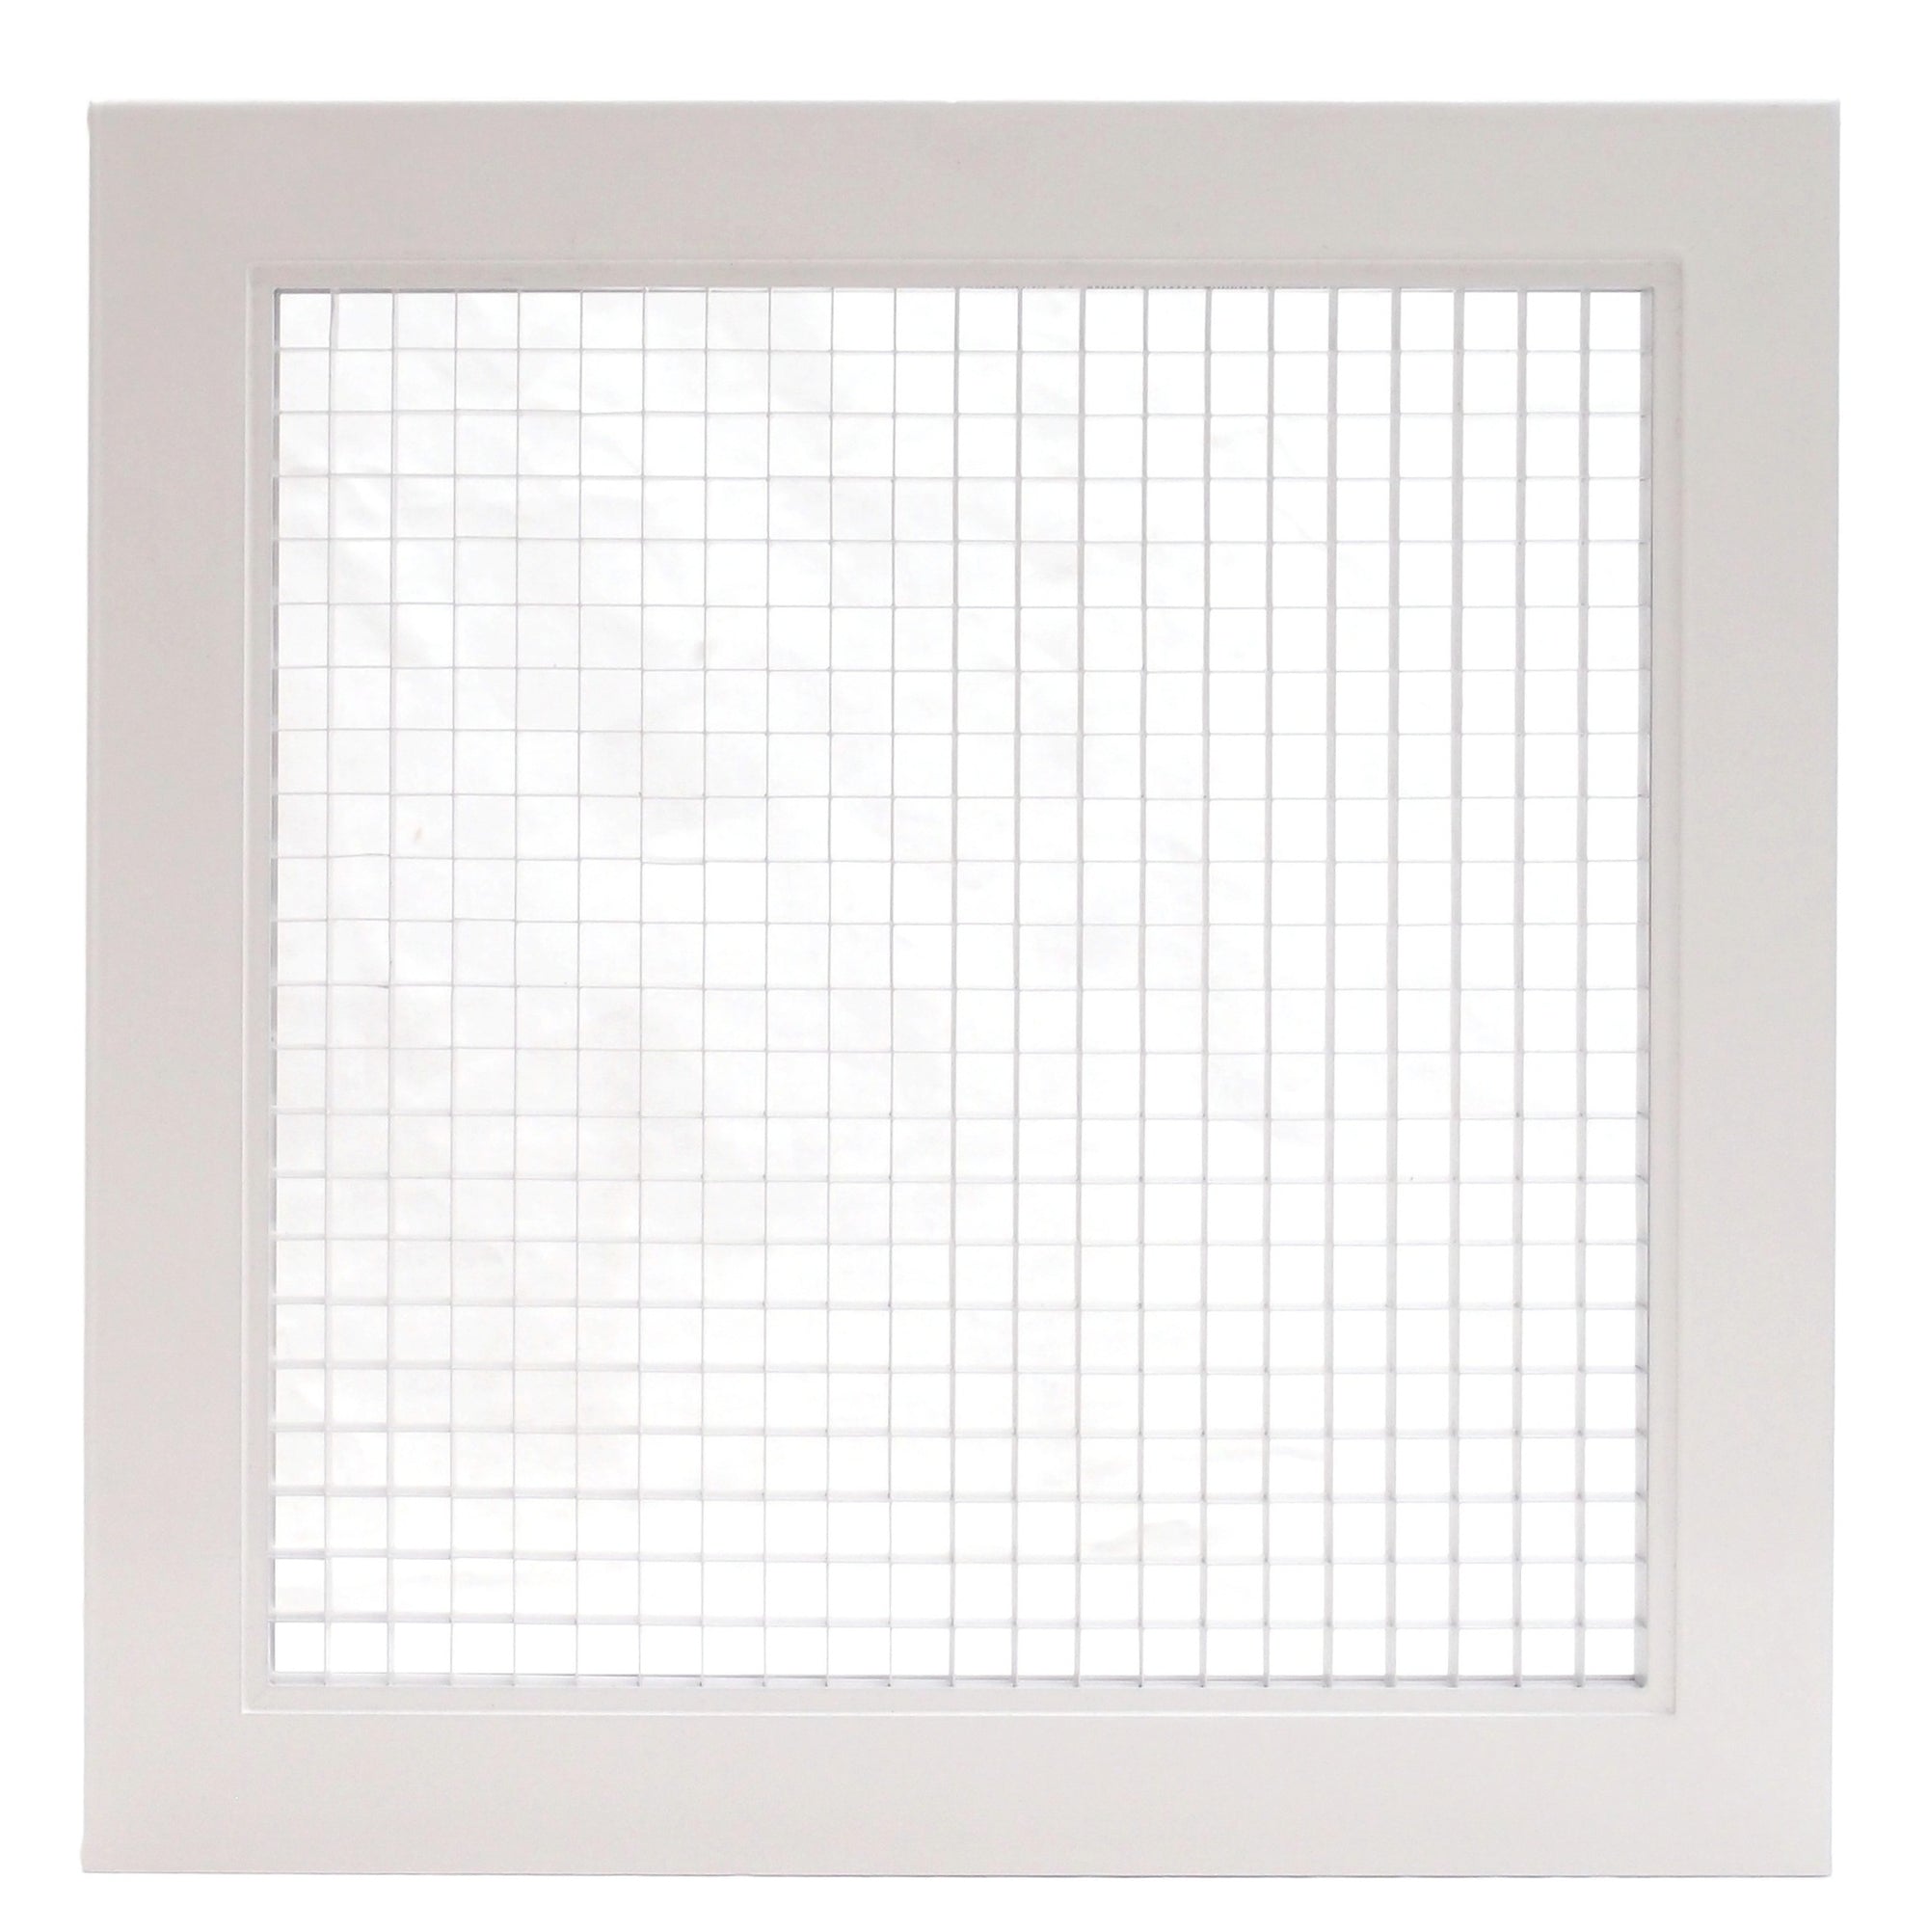 36" x 12" Cube Core Eggcrate Return Air Filter Grille for 1" Filter